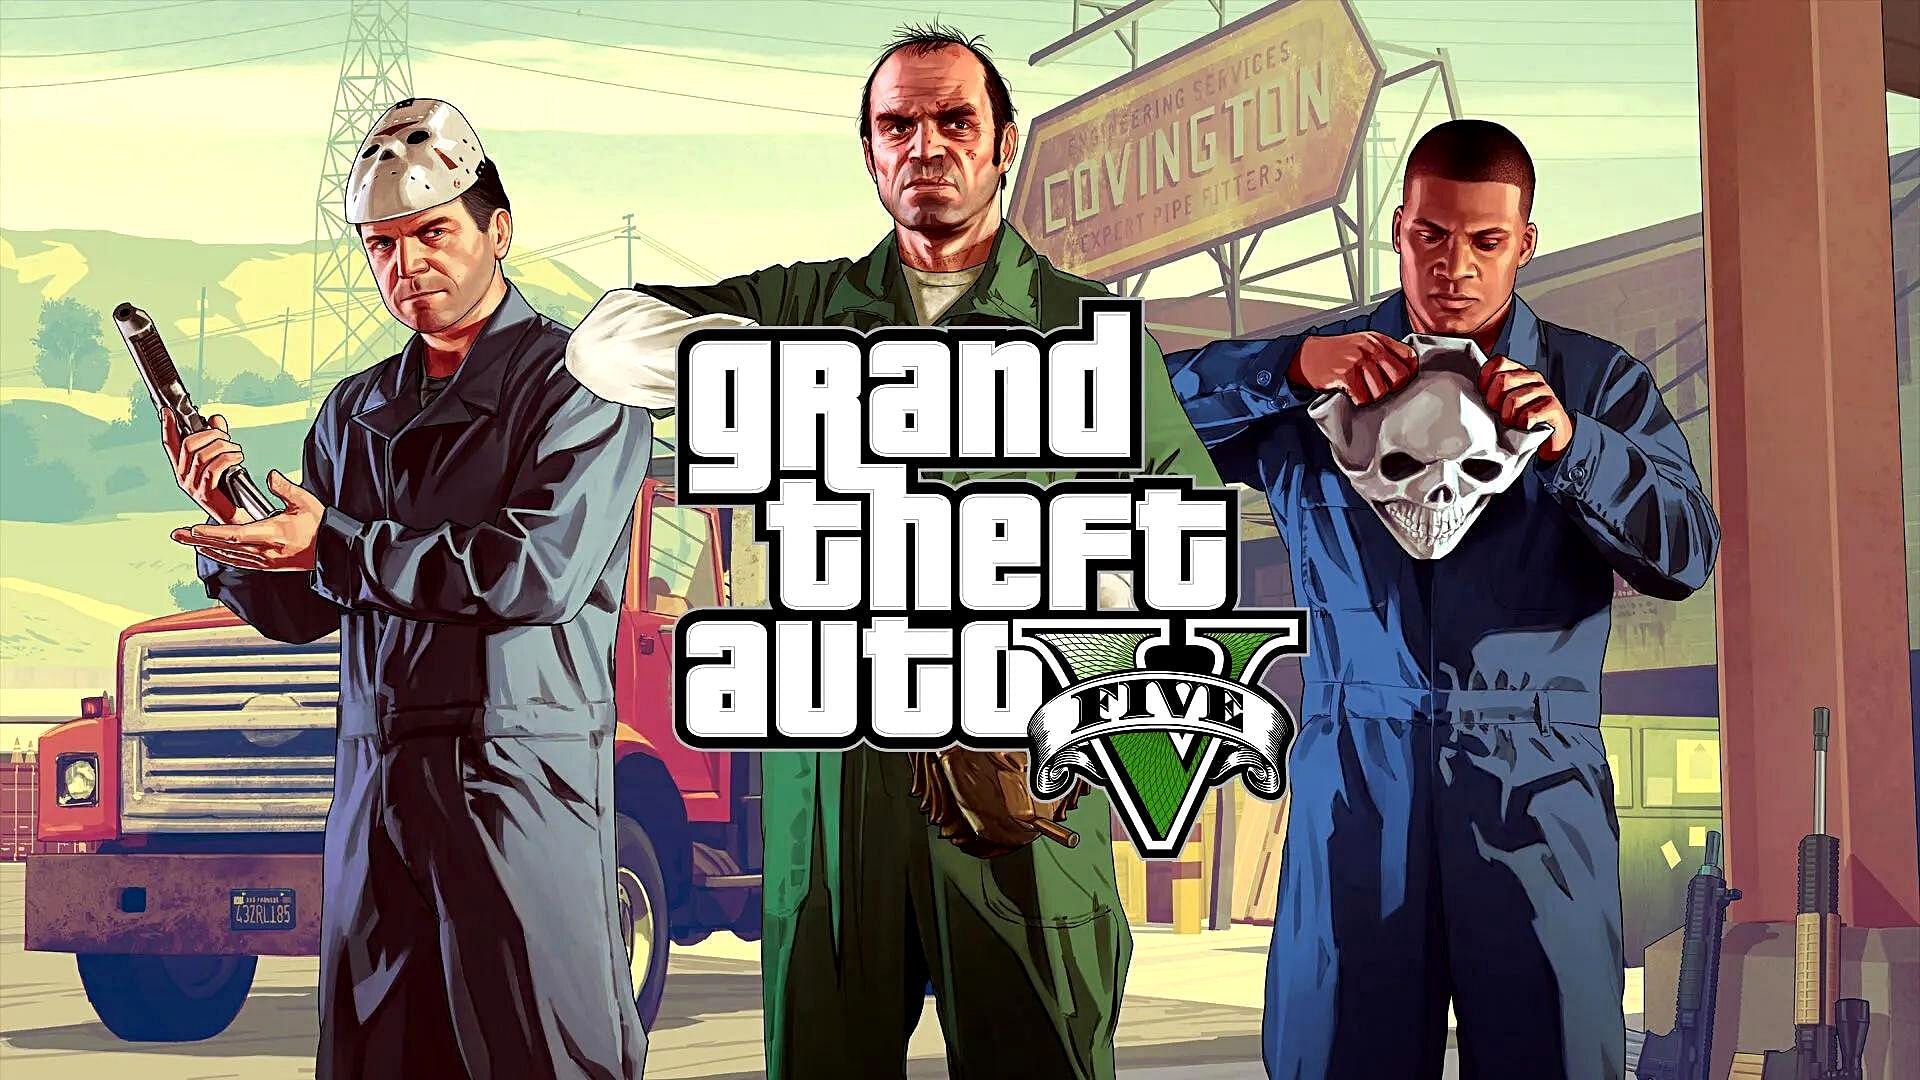 GTA 5 is the most-watched game on Twitch for December so far